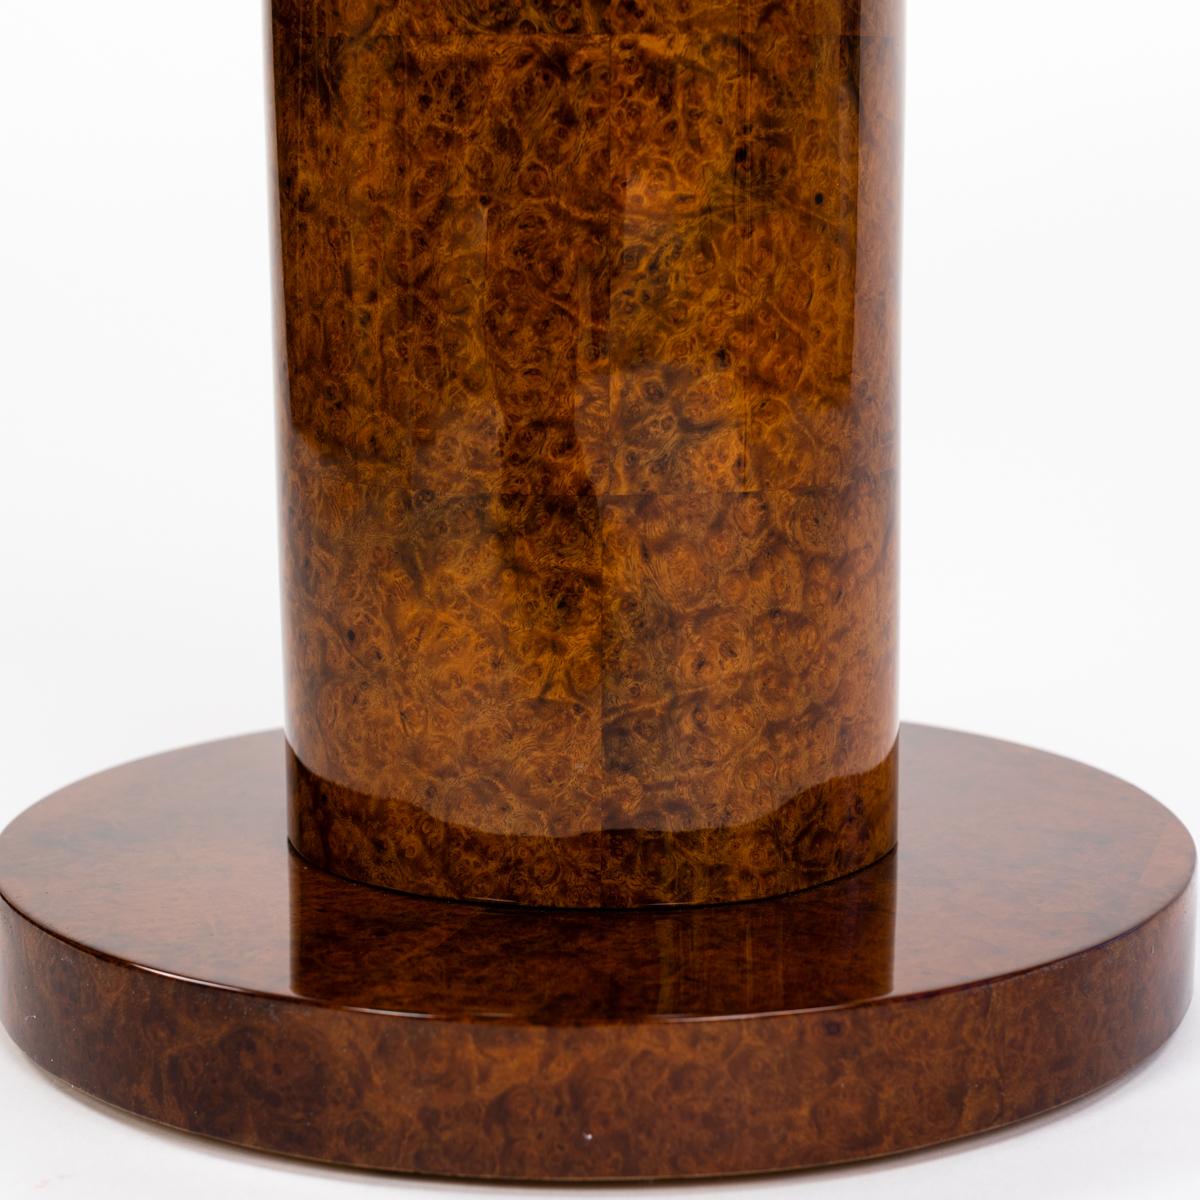 Lacquered French Art Déco Gueridon, Coffee Table Amboyna Veneer High Gloss Lacquer, 1930s